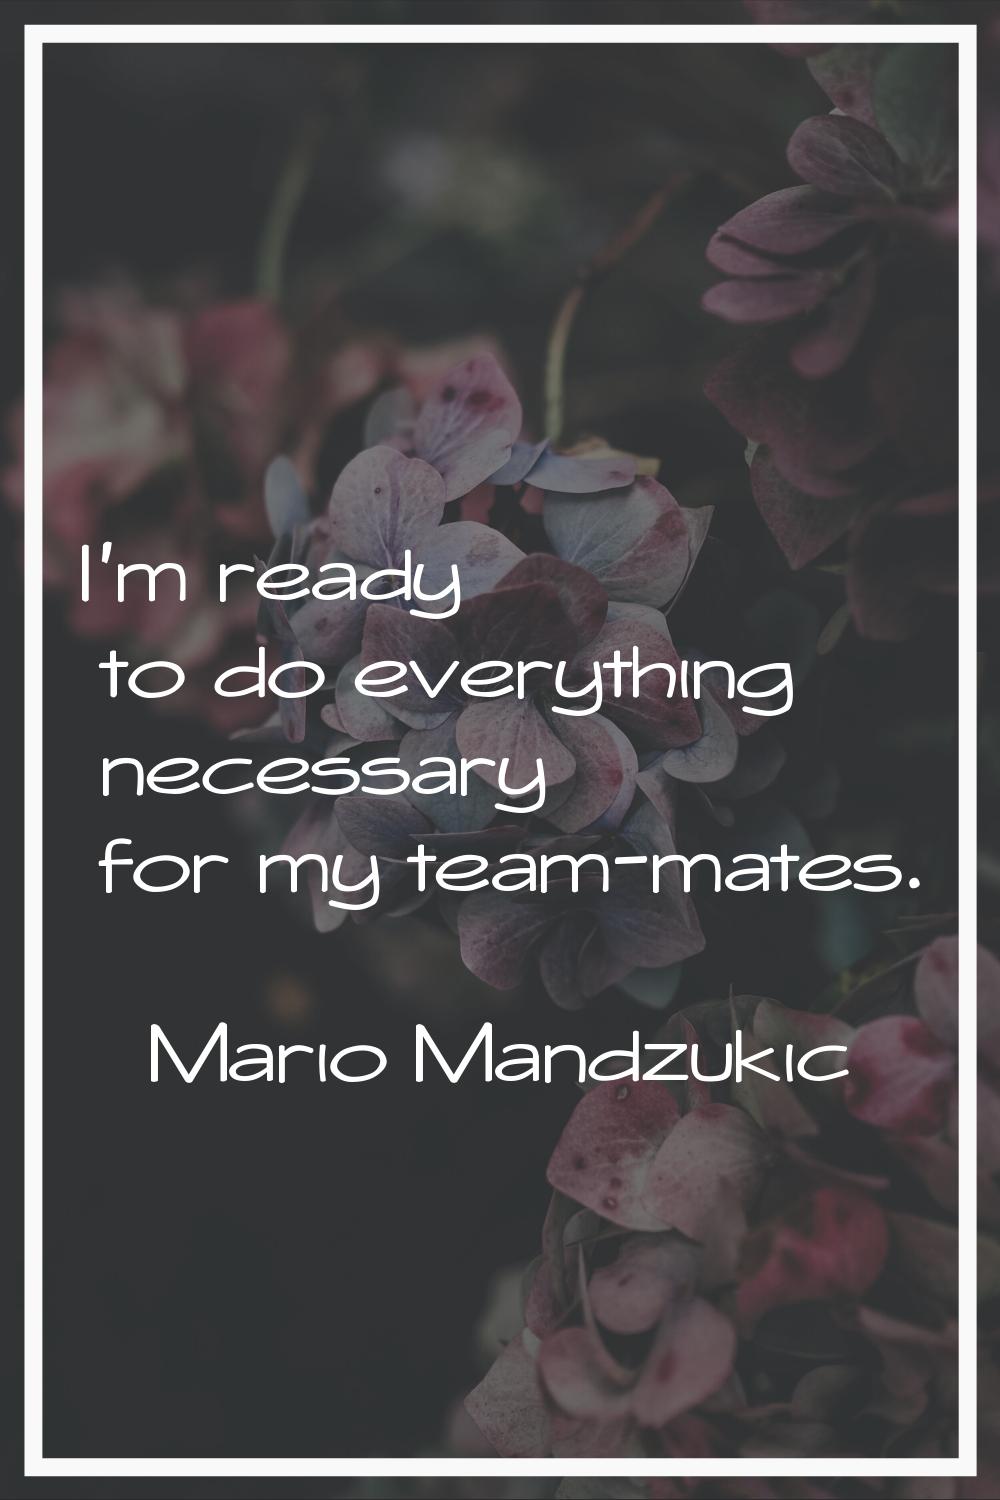 I'm ready to do everything necessary for my team-mates.